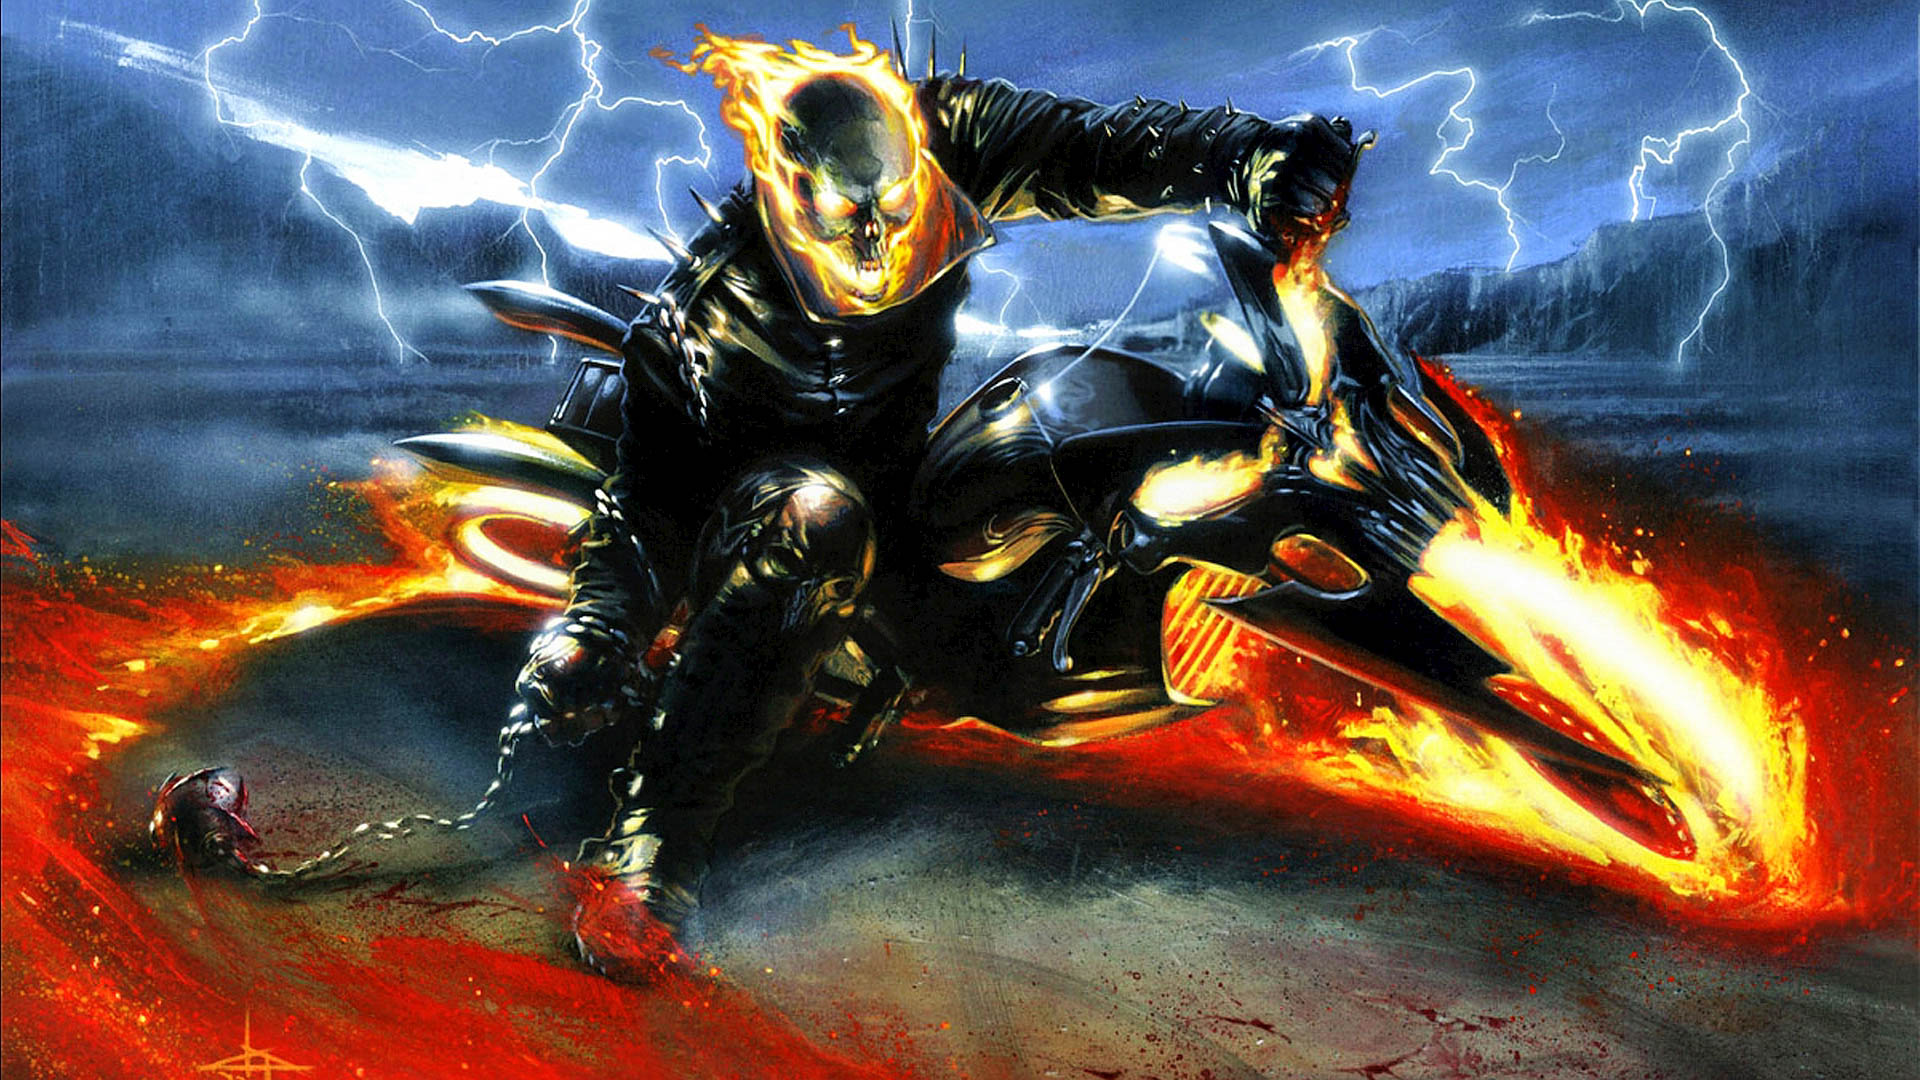 Ghost Rider full movie HD 720 download